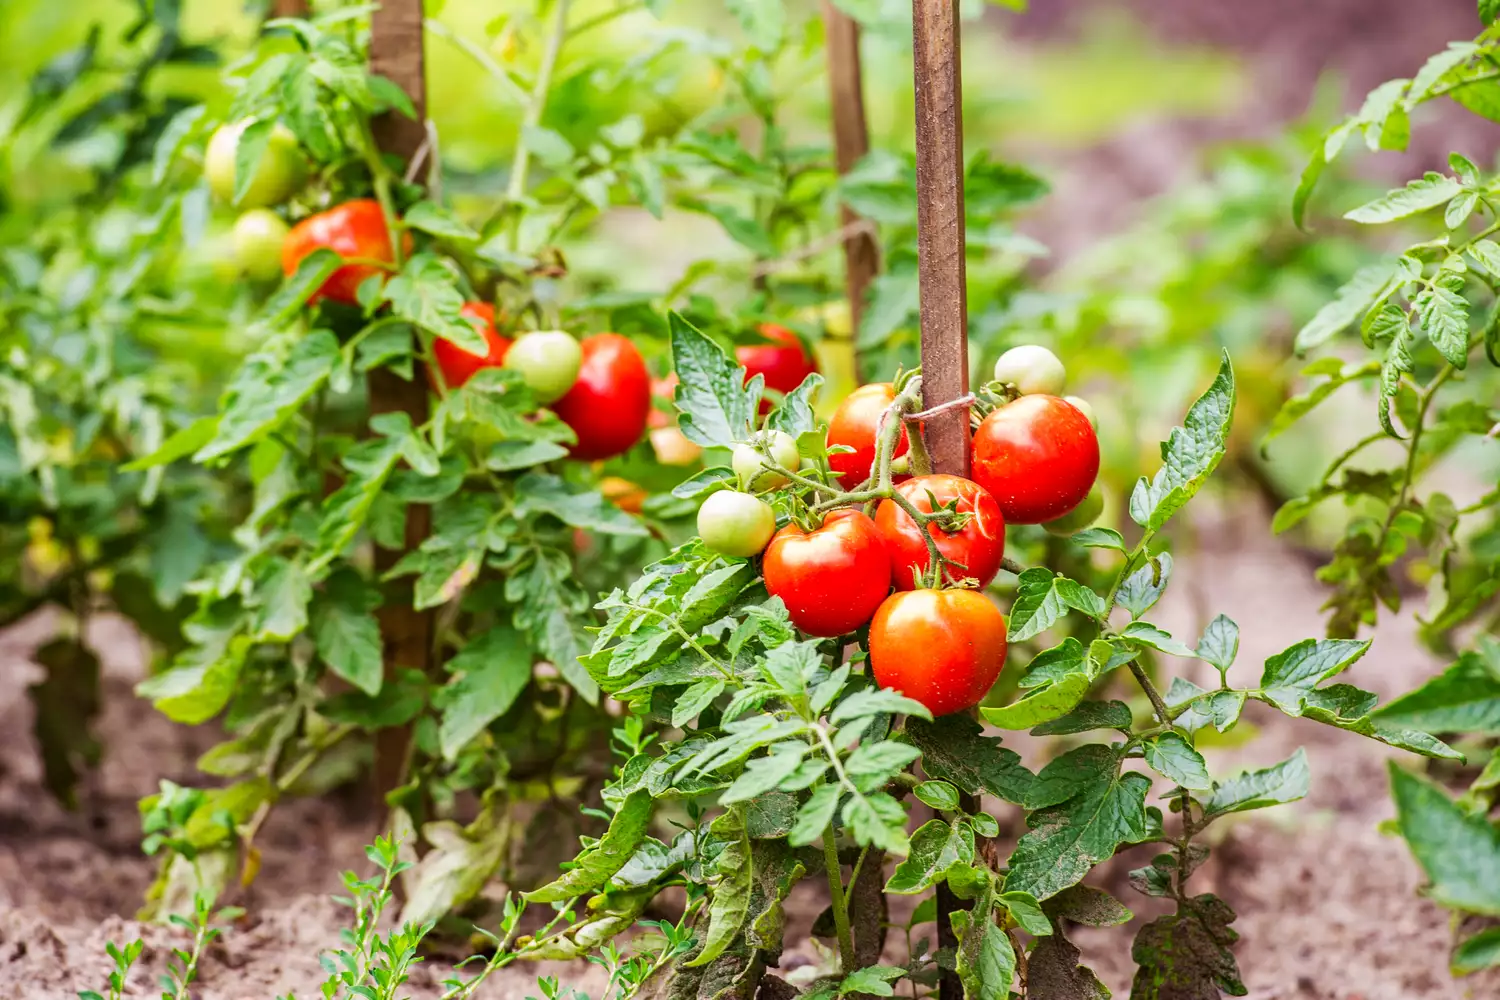 How Far Apart to Plant Tomatoes in a Vegetable Garden